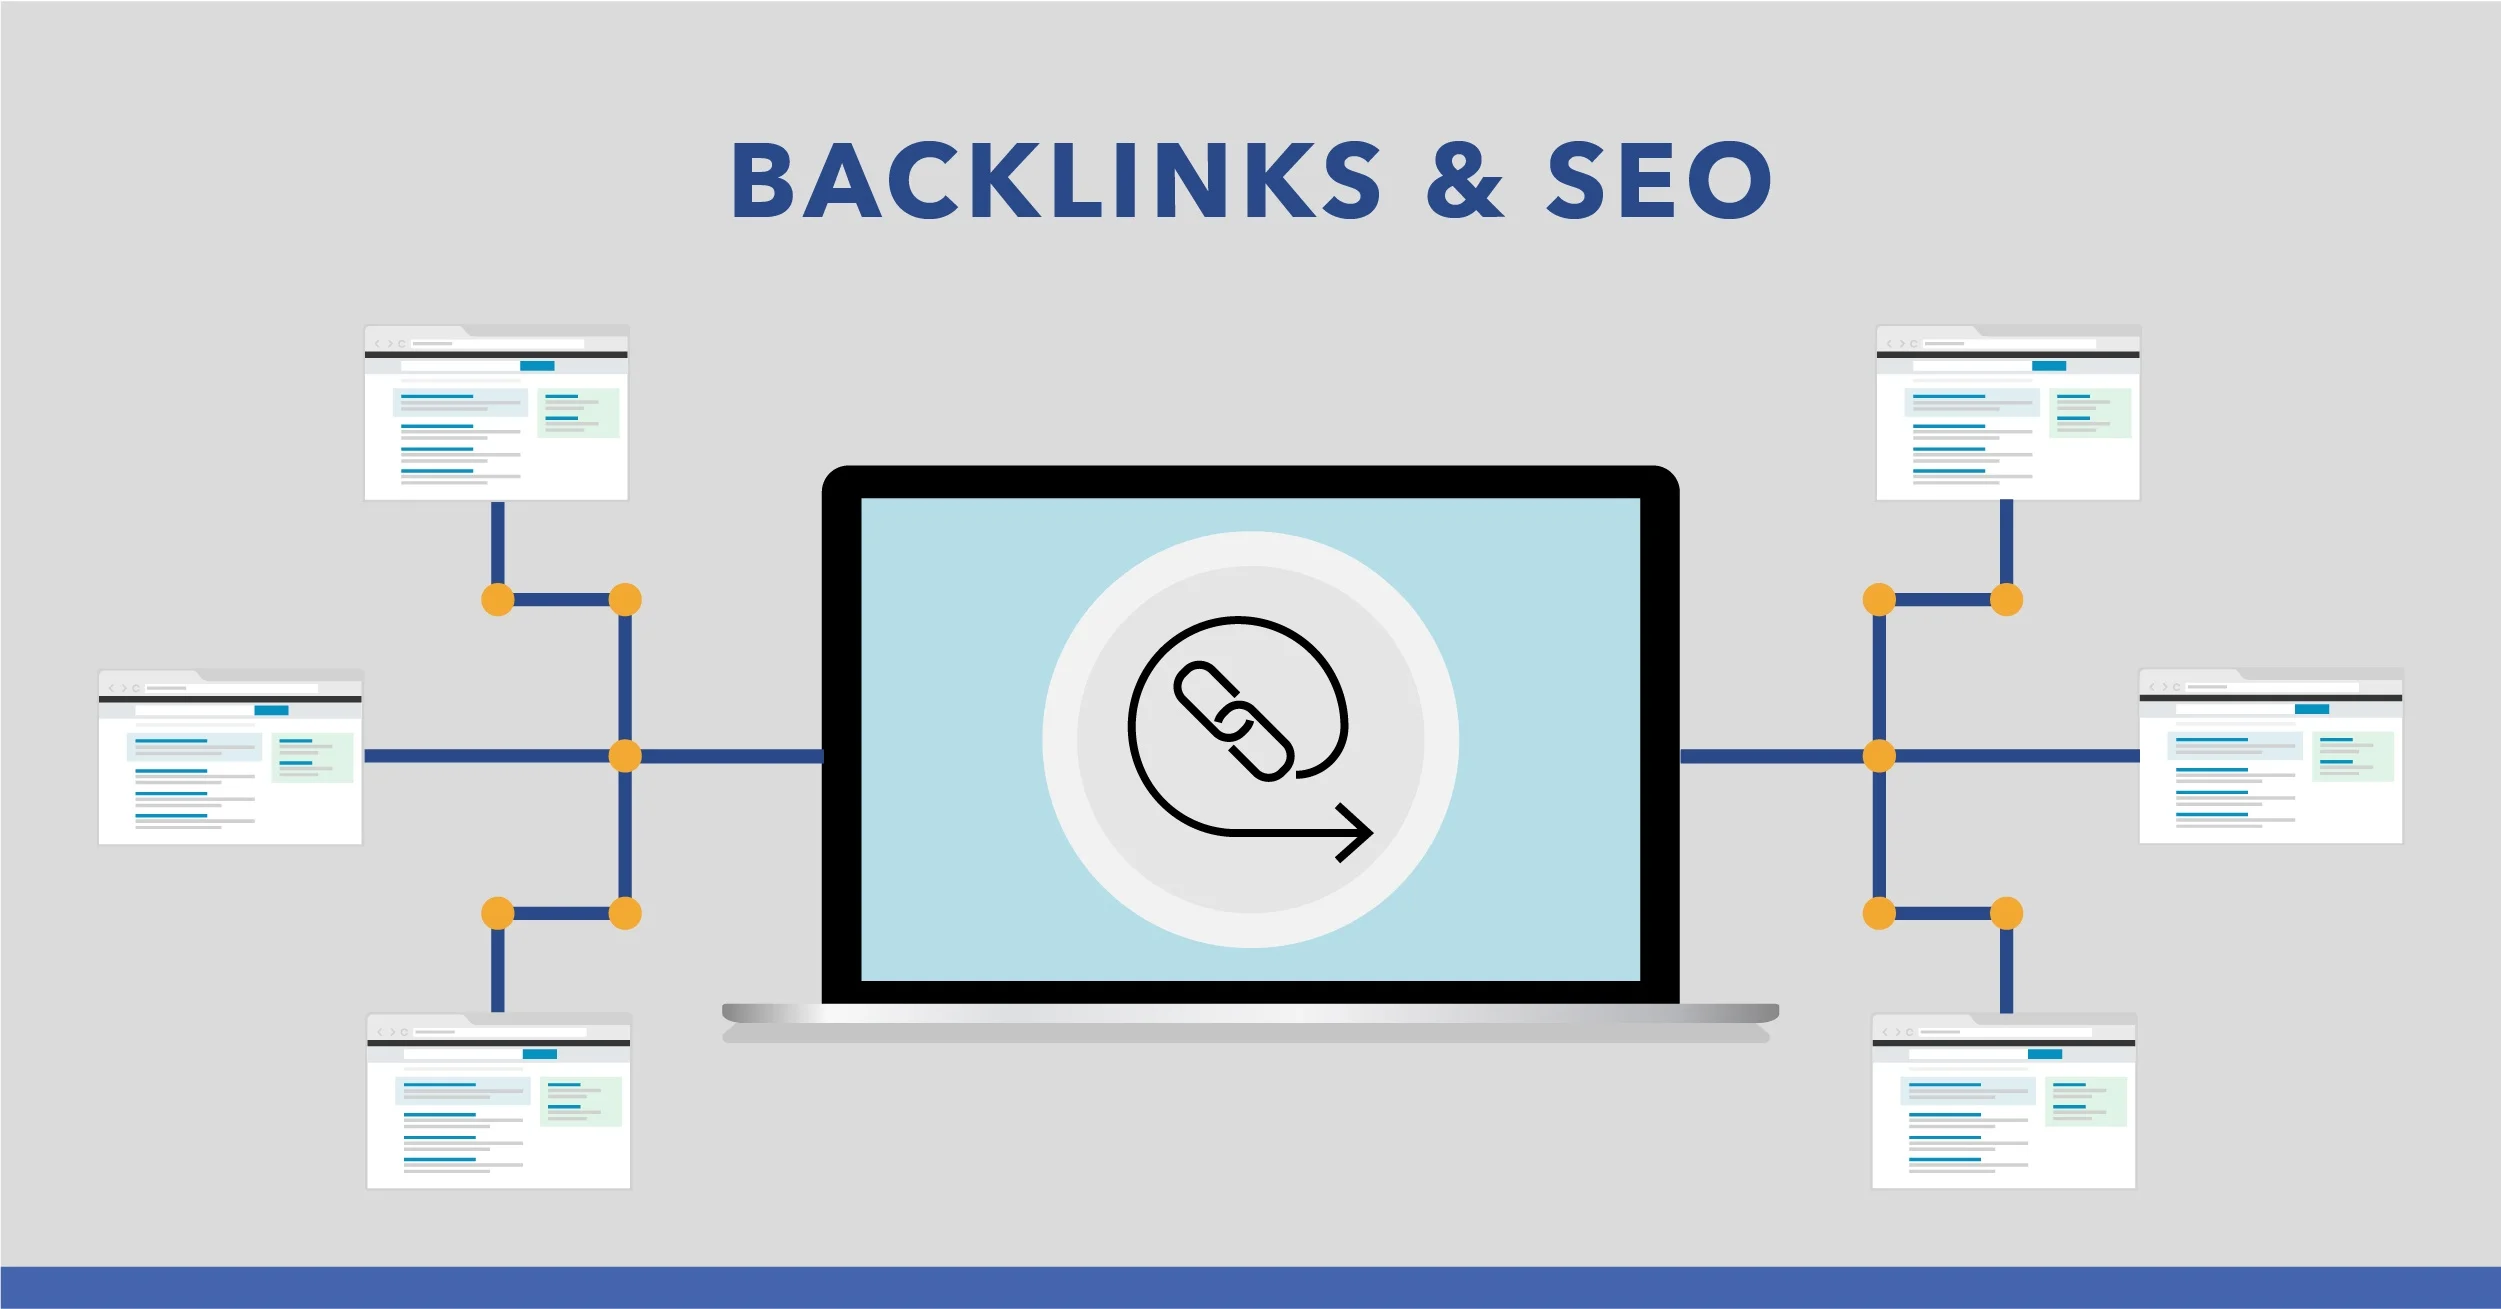 What is backlink in SEO?